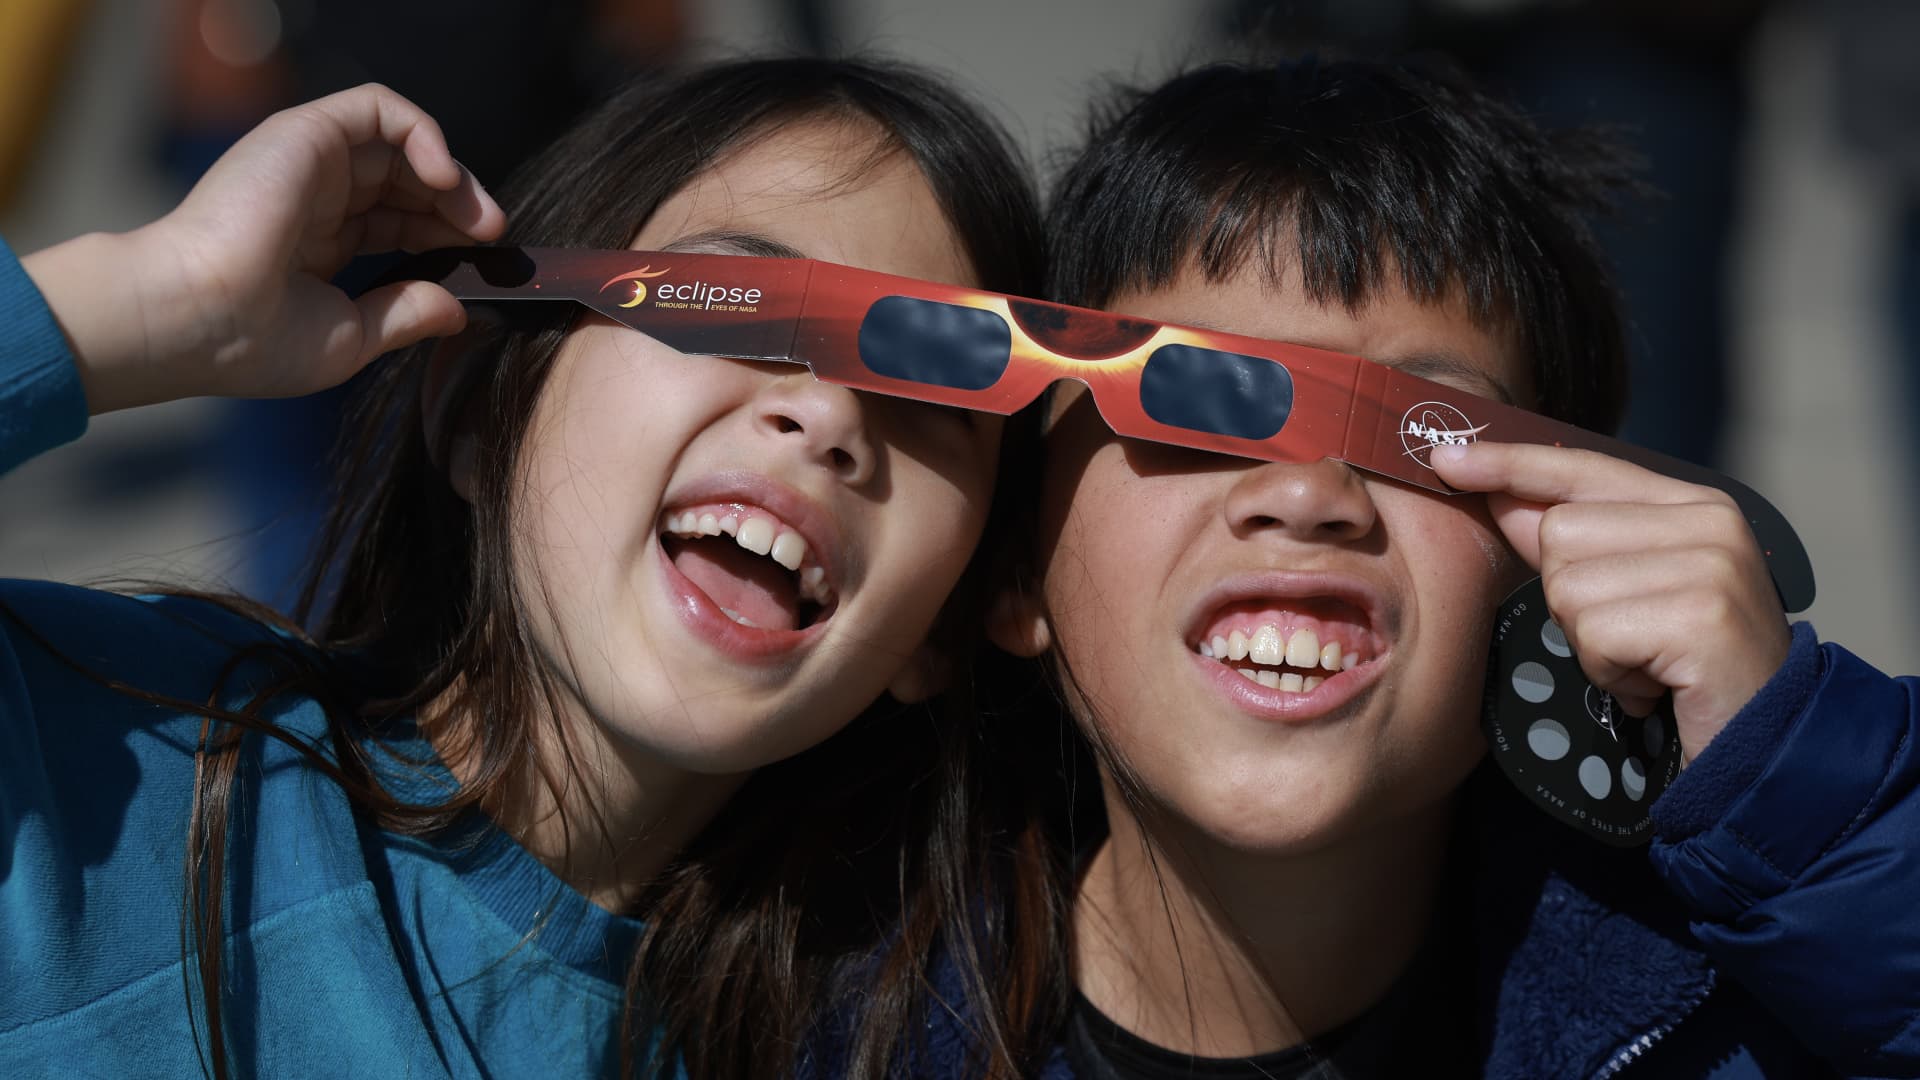 Miriam Toy (L) and Oliver Toy share a pair of eclipse glasses that NASA was handing out as they await the eclipse on April 08, 2024, in Houlton, Maine. 